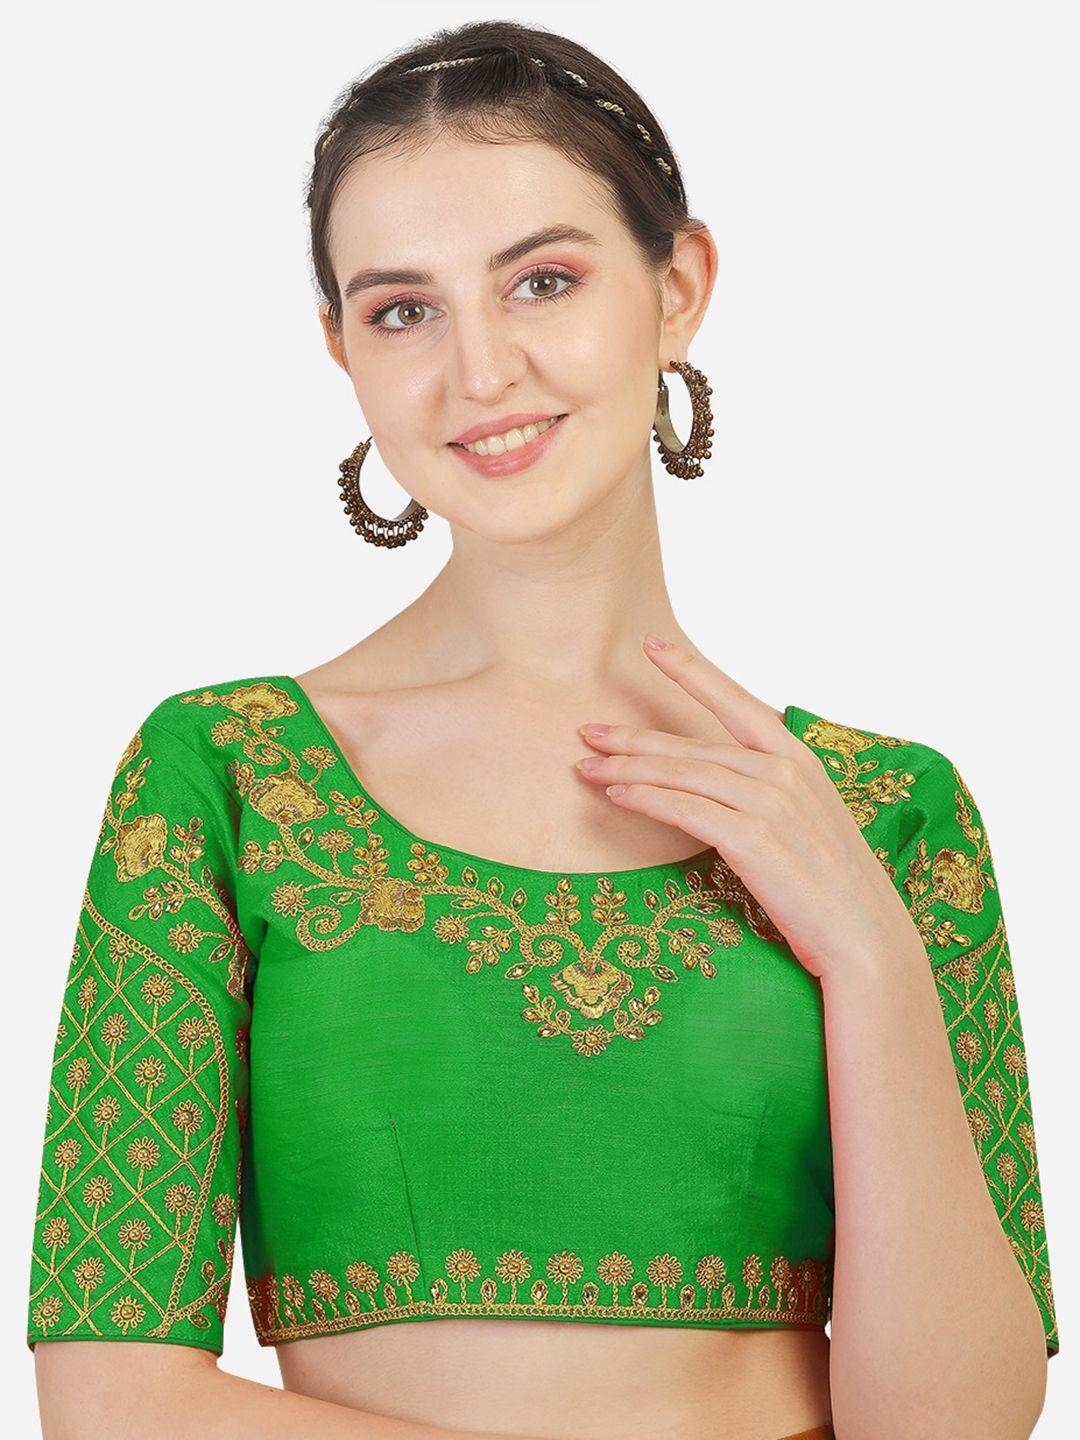 sumaira-tex-women-lime-green-&-gold-embroidered-readymade-saree-blouse